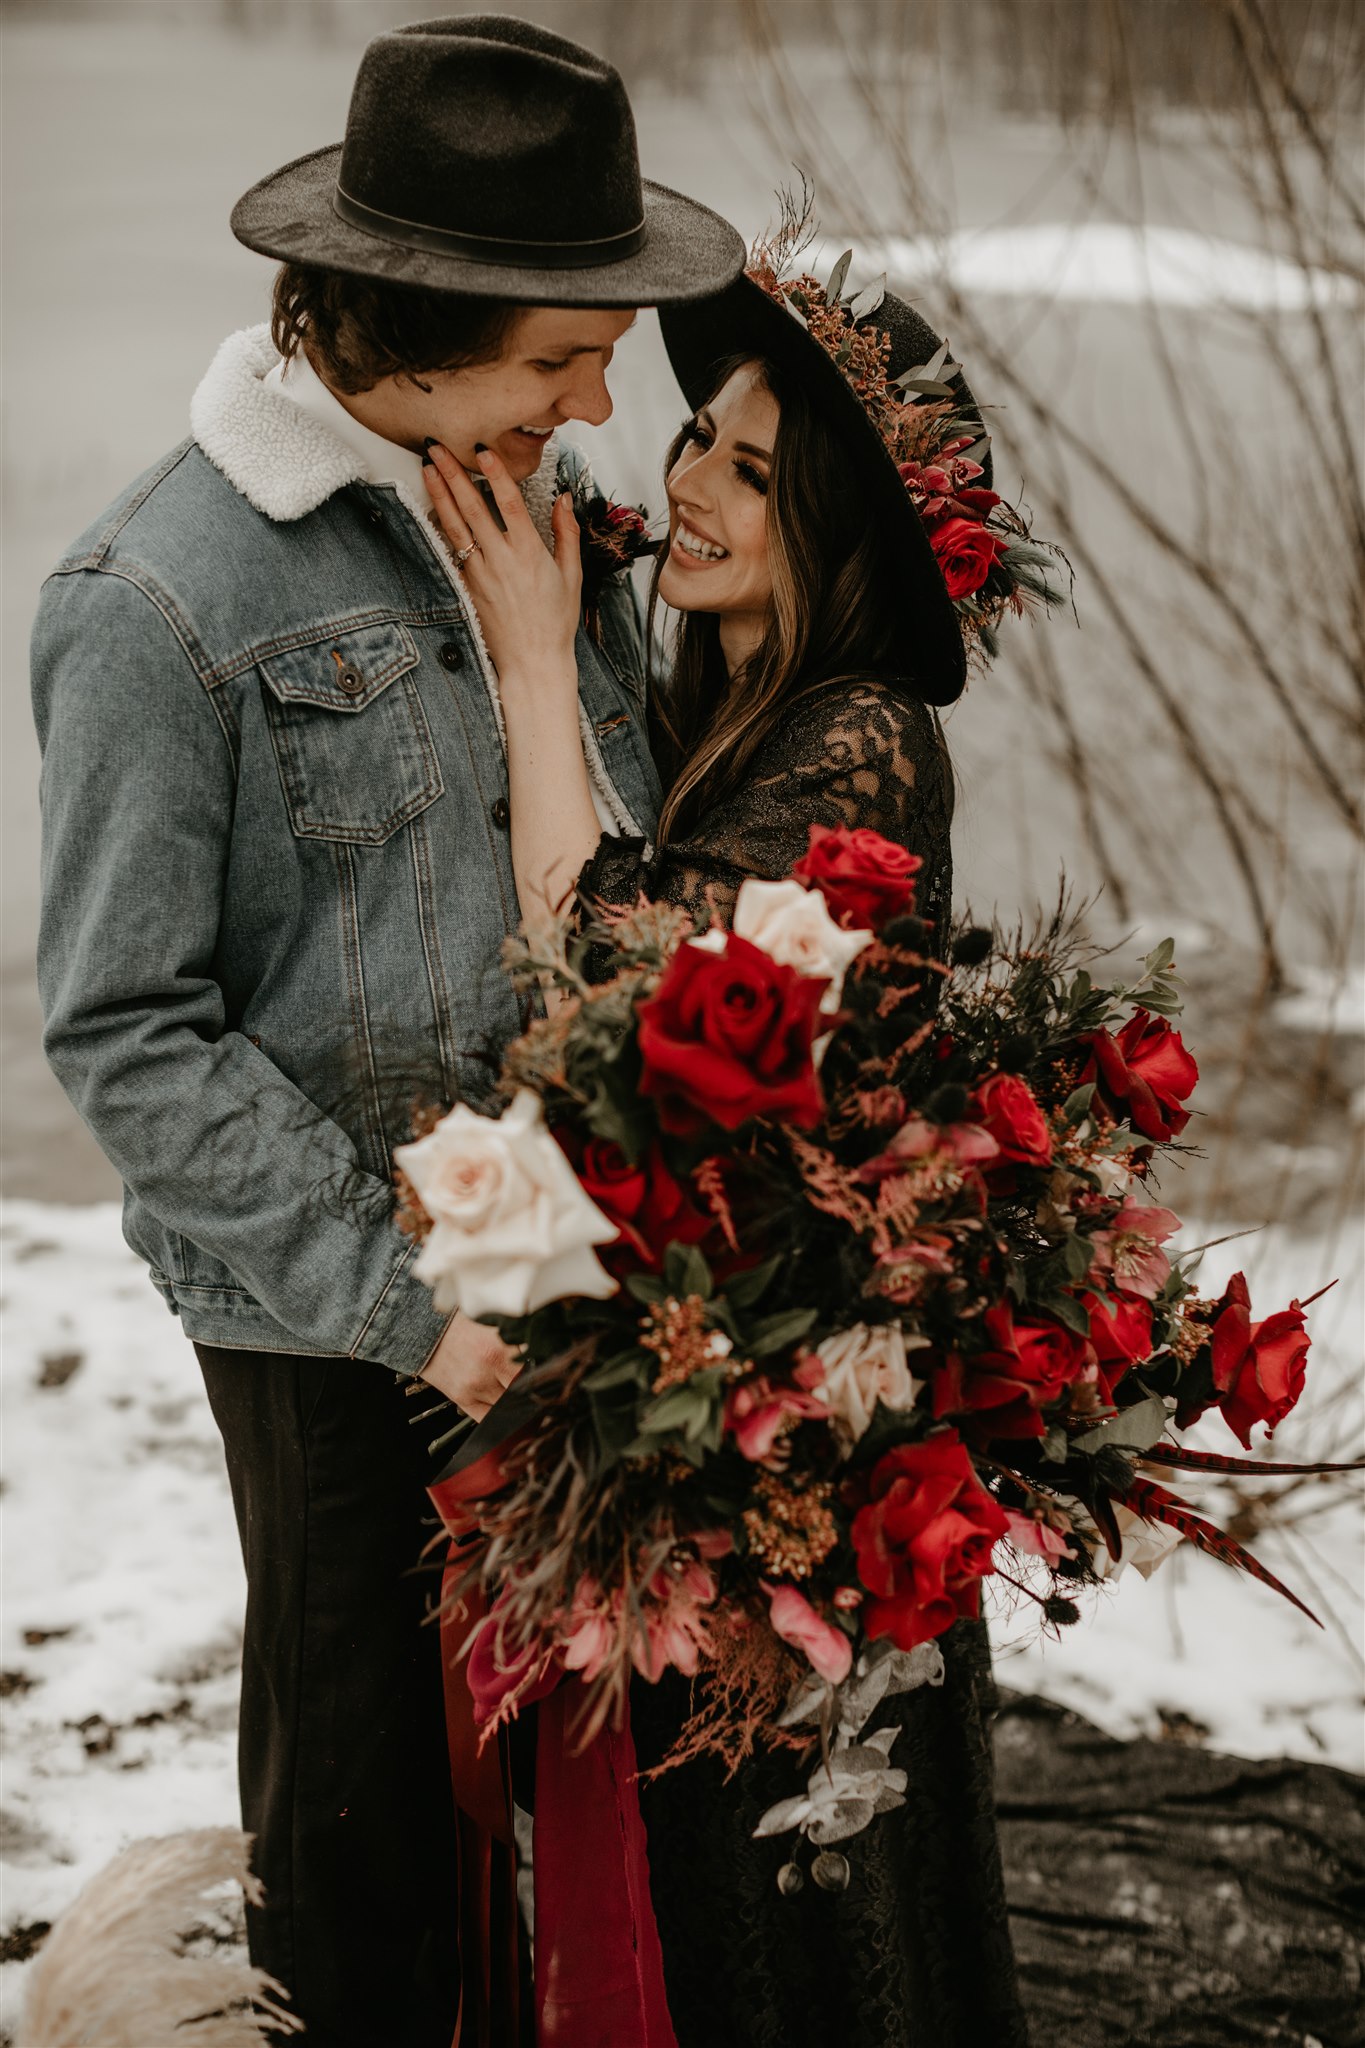 Boho bride with giant red wedding bouquet and black wedding hat with groom in jean jacket